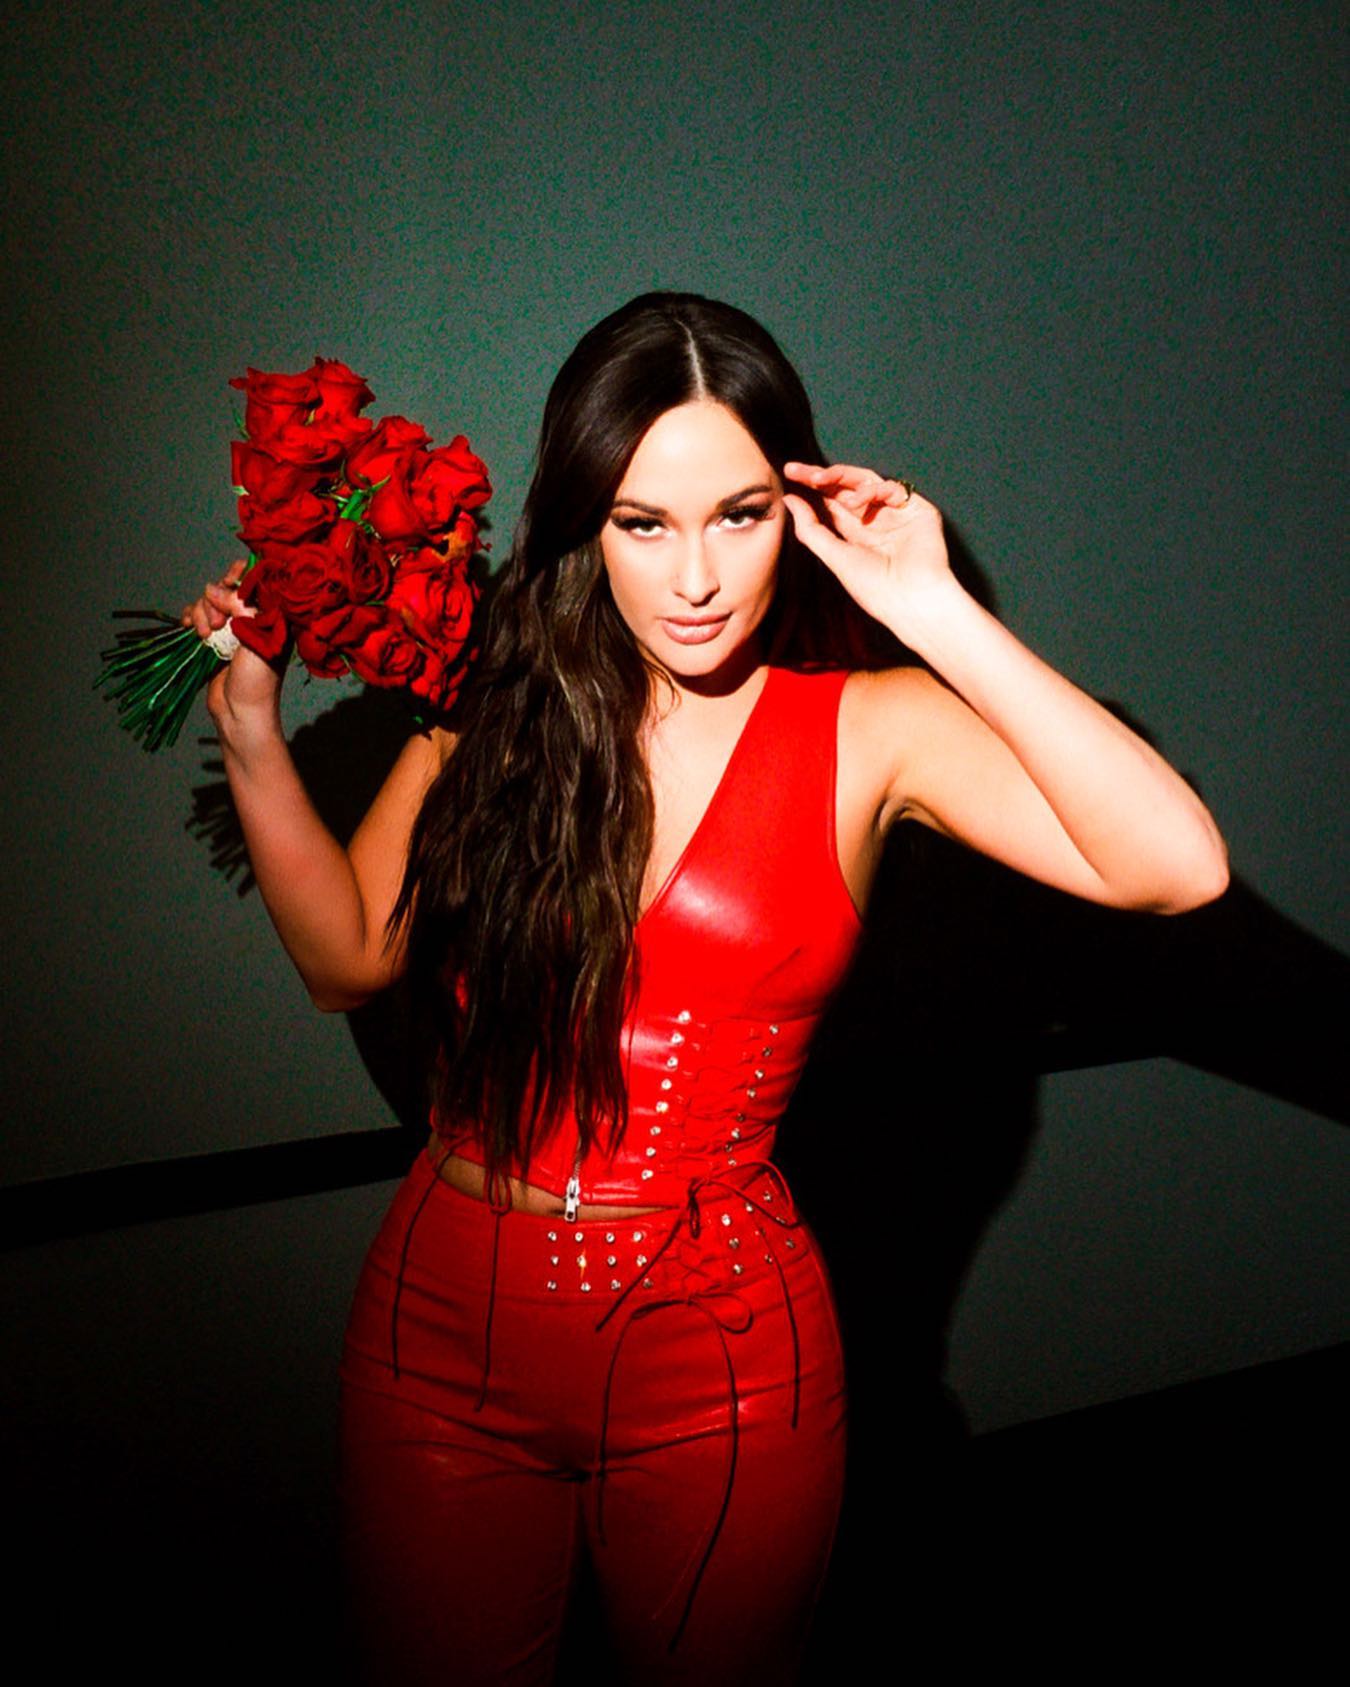 Kacey Musgraves Photoshoot in Red Attire with Holding Red Rose Bouquet, February 2022